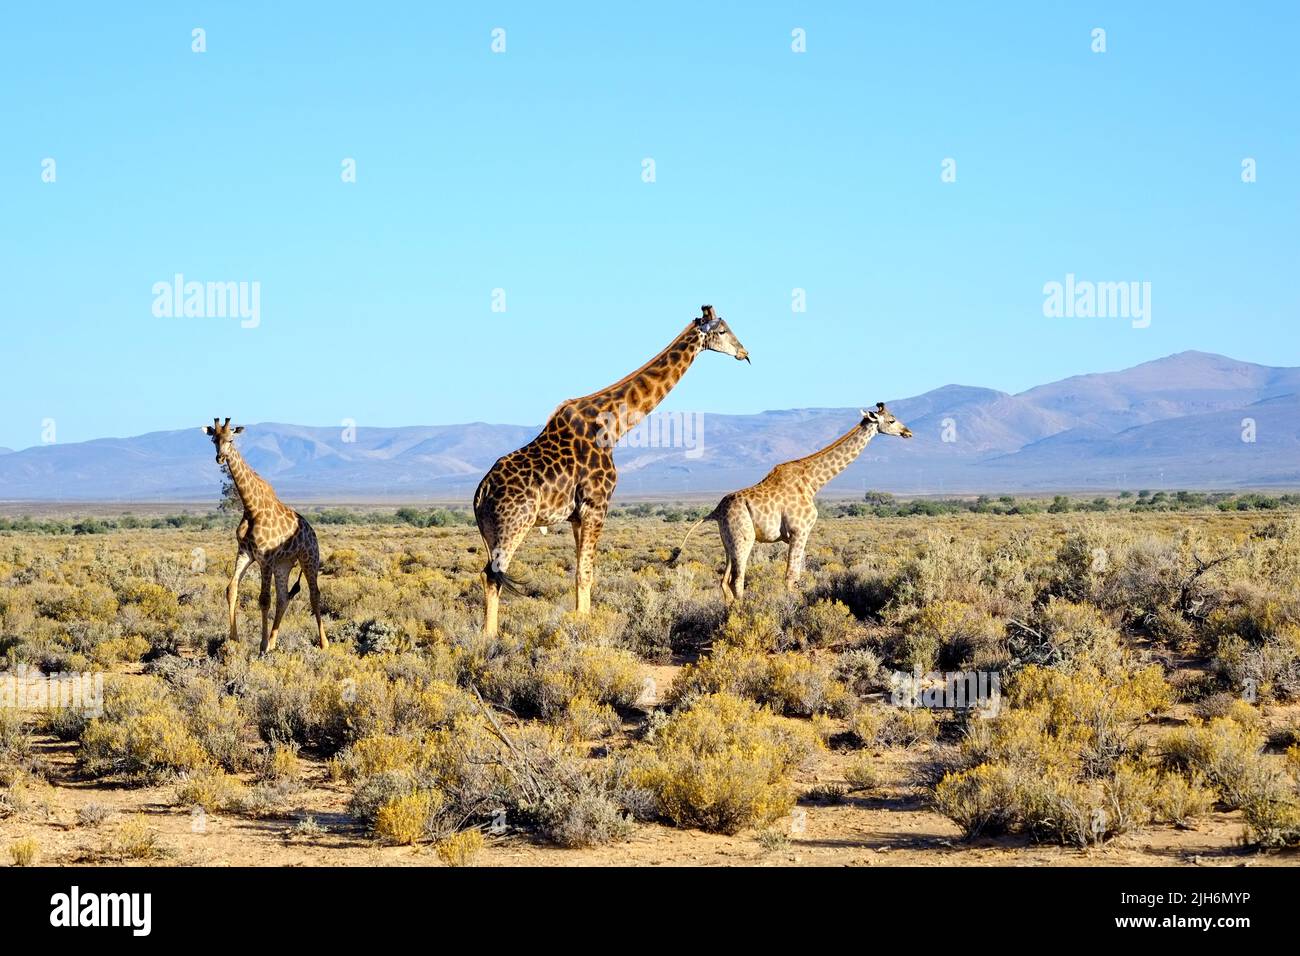 Tall giraffes in the savannah in South Africa. Wildlife conservation is important for all animals living in the wild. Animals walking around a Stock Photo